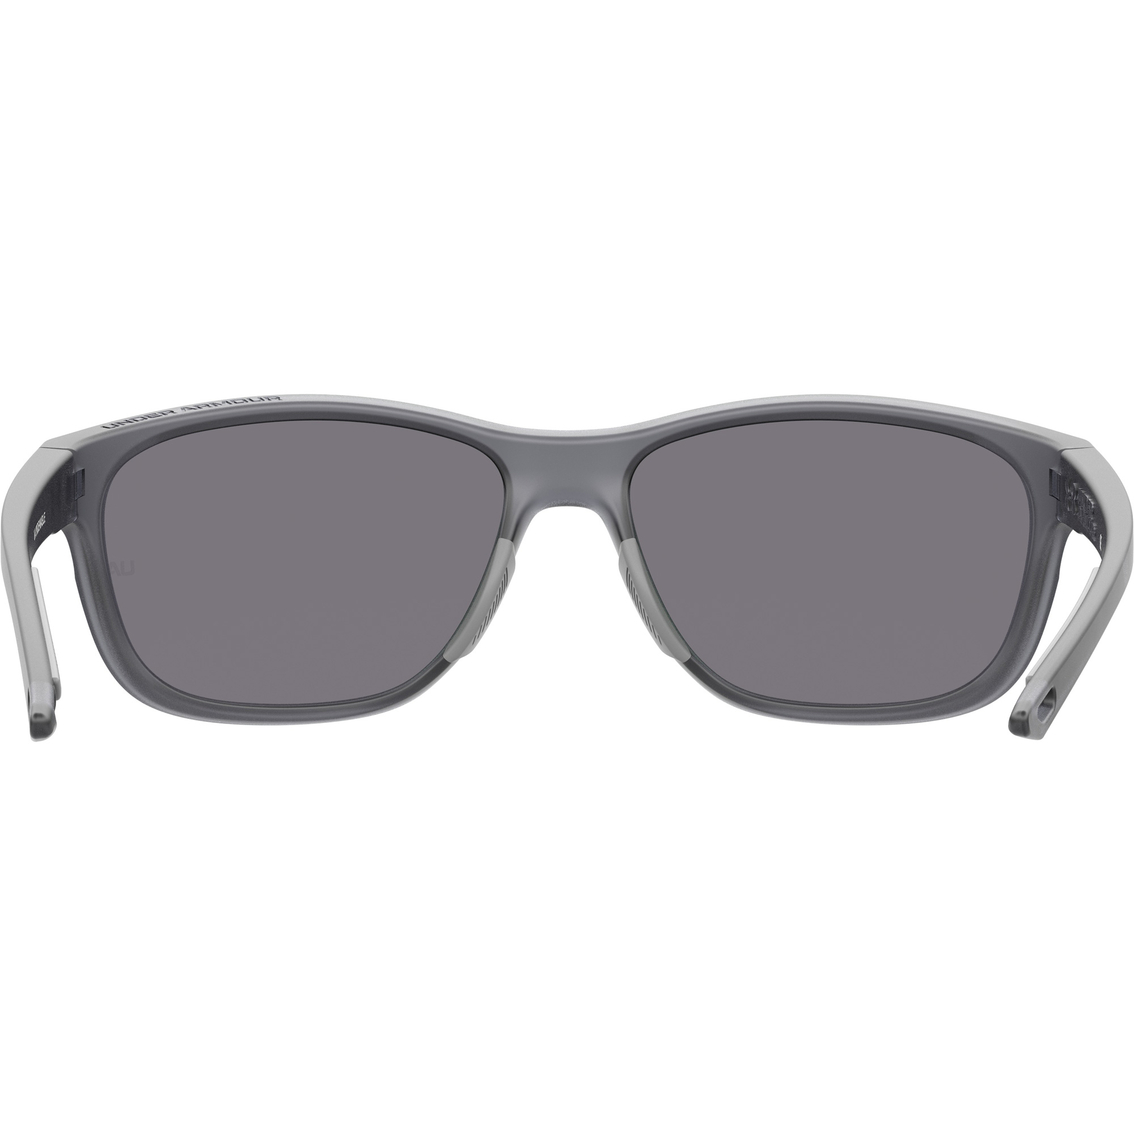 Under Armour Undeniable Sporty Wrap Sunglasses 063MZ9 - Image 3 of 5